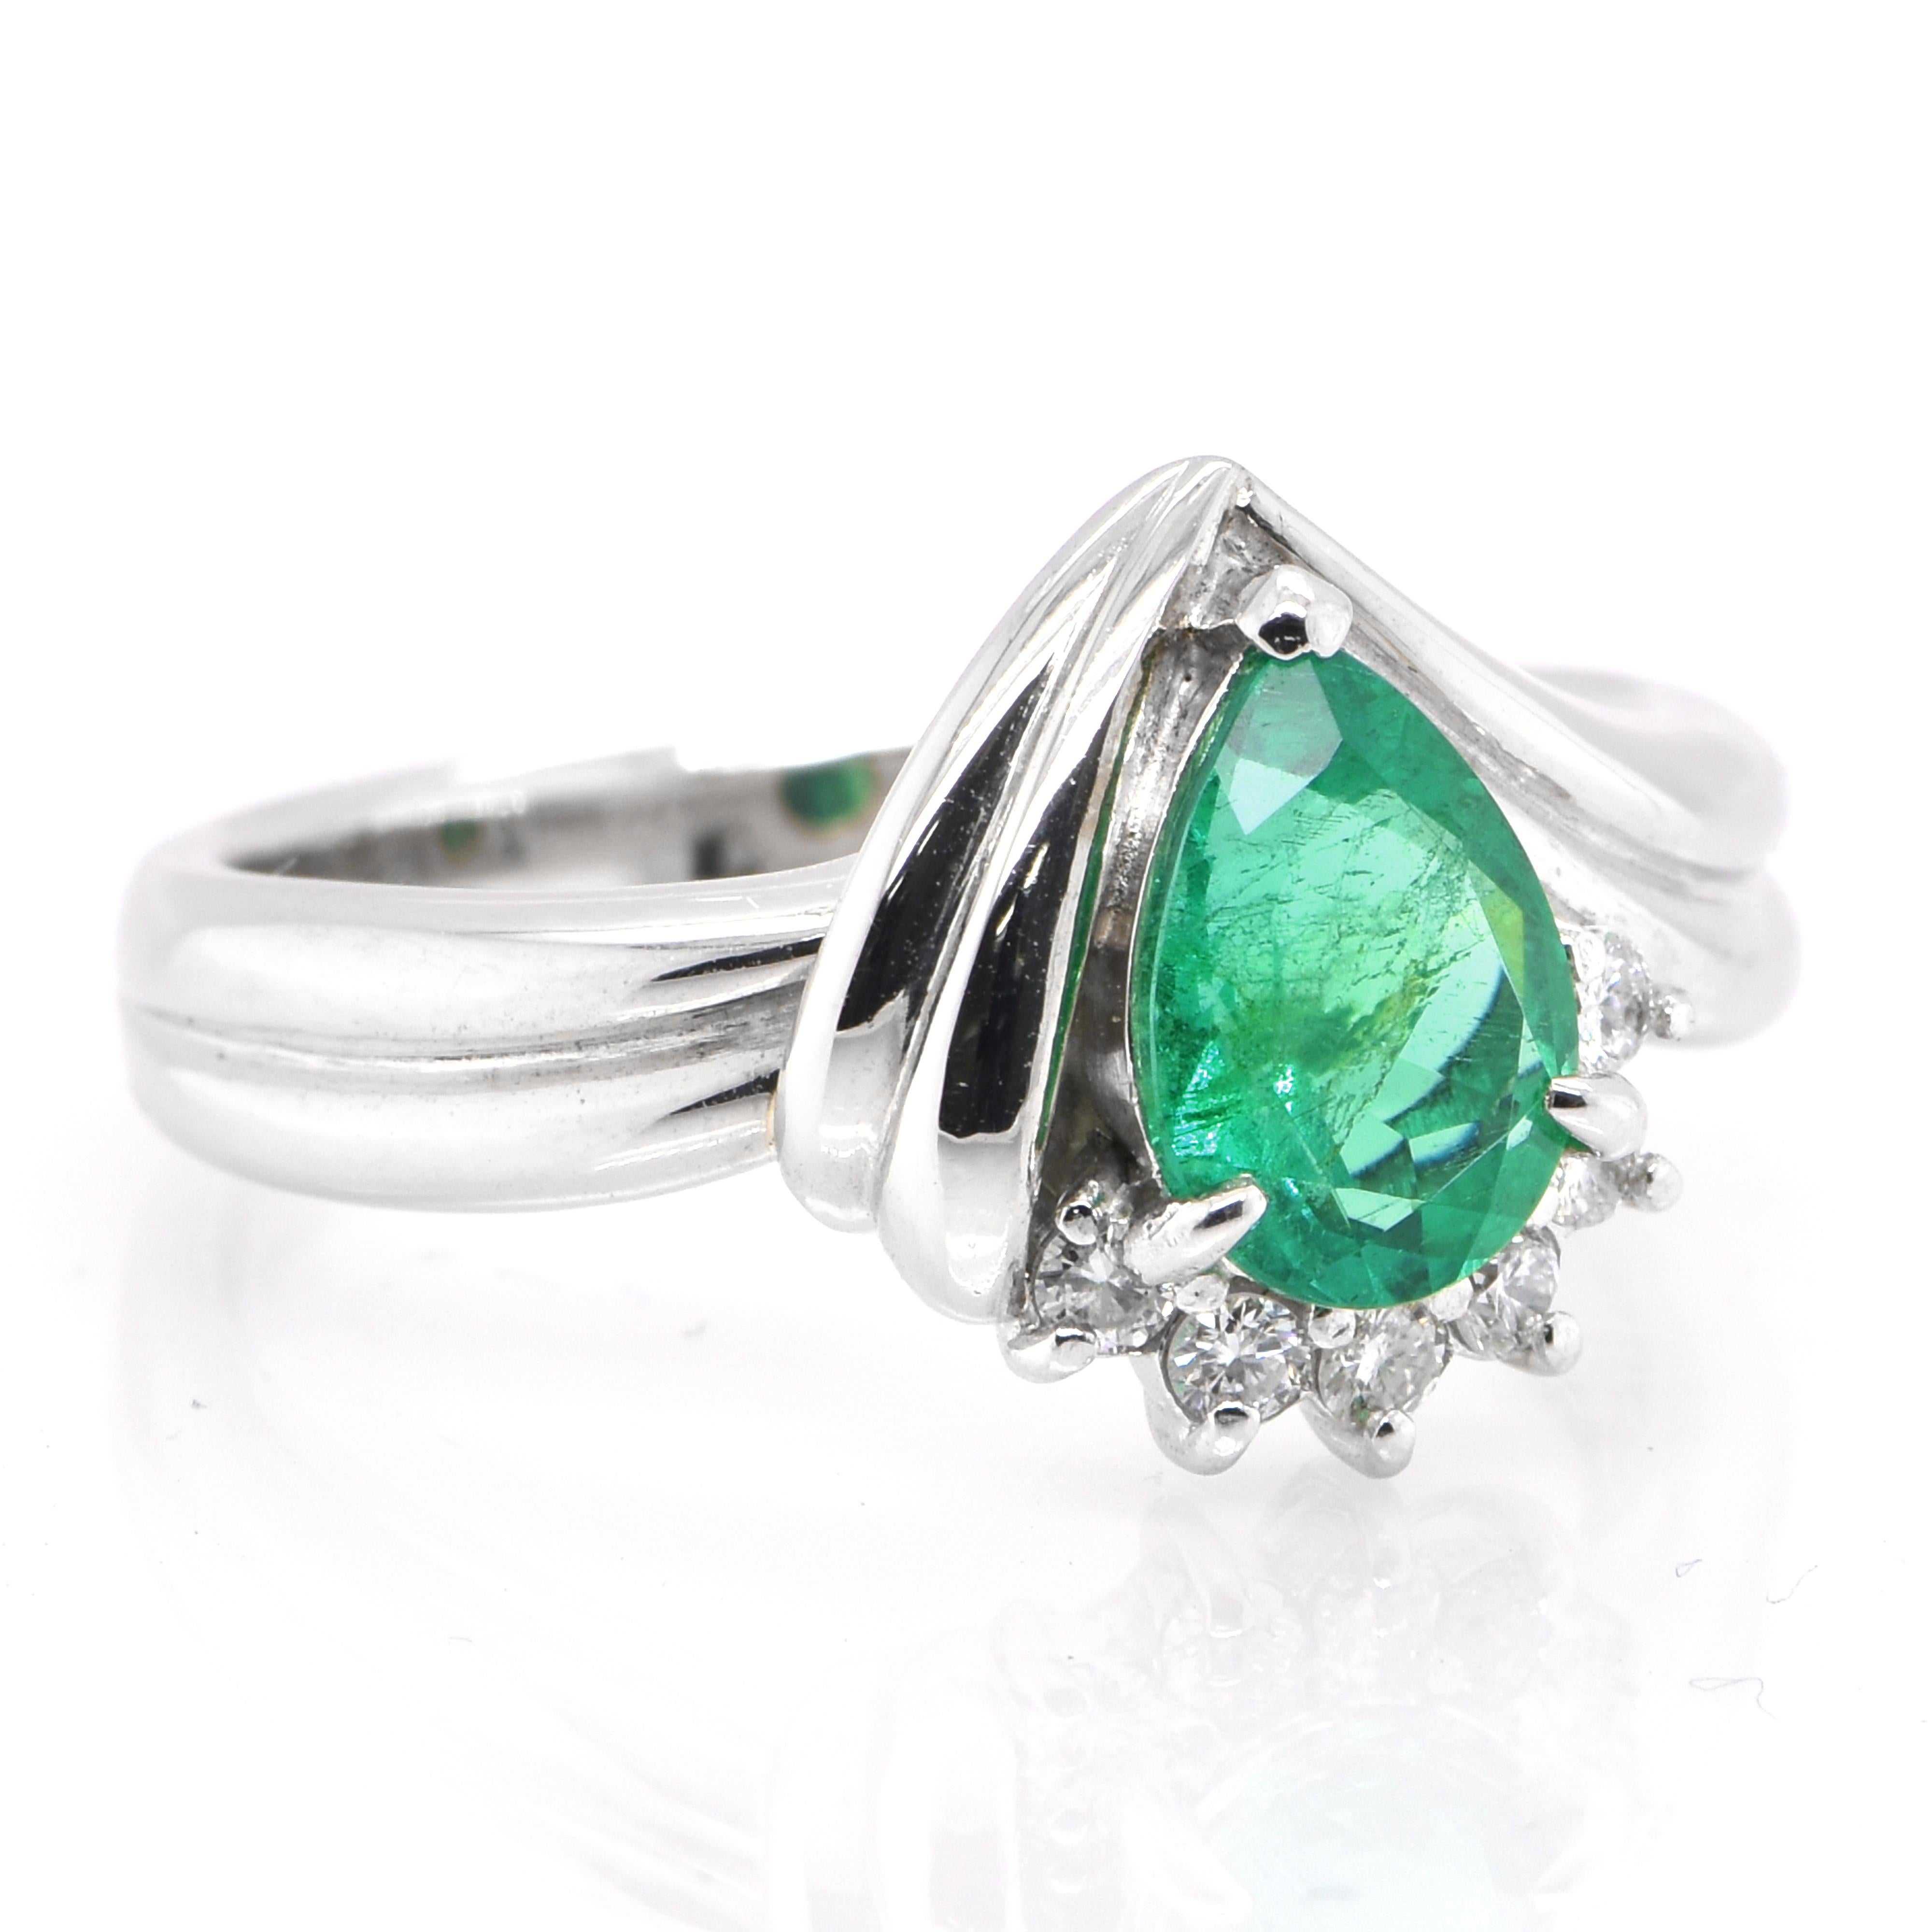 Modern 0.91 Carat Colombian, Pear-Cut Emerald and Diamond Ring Set in Platinum For Sale